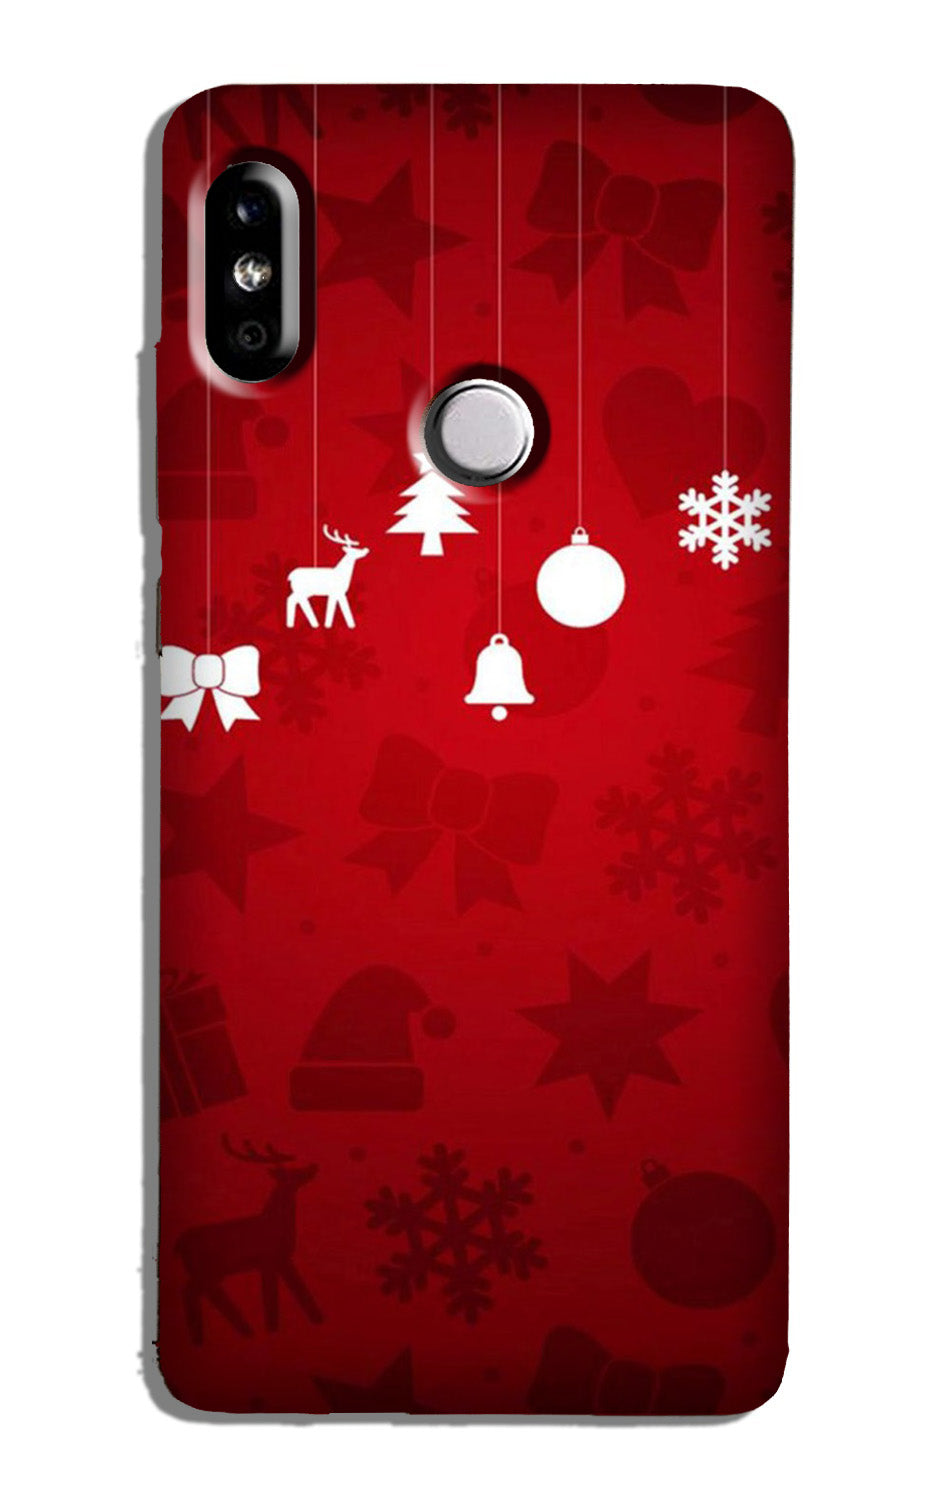 Christmas Case for Redmi Note 6 Pro